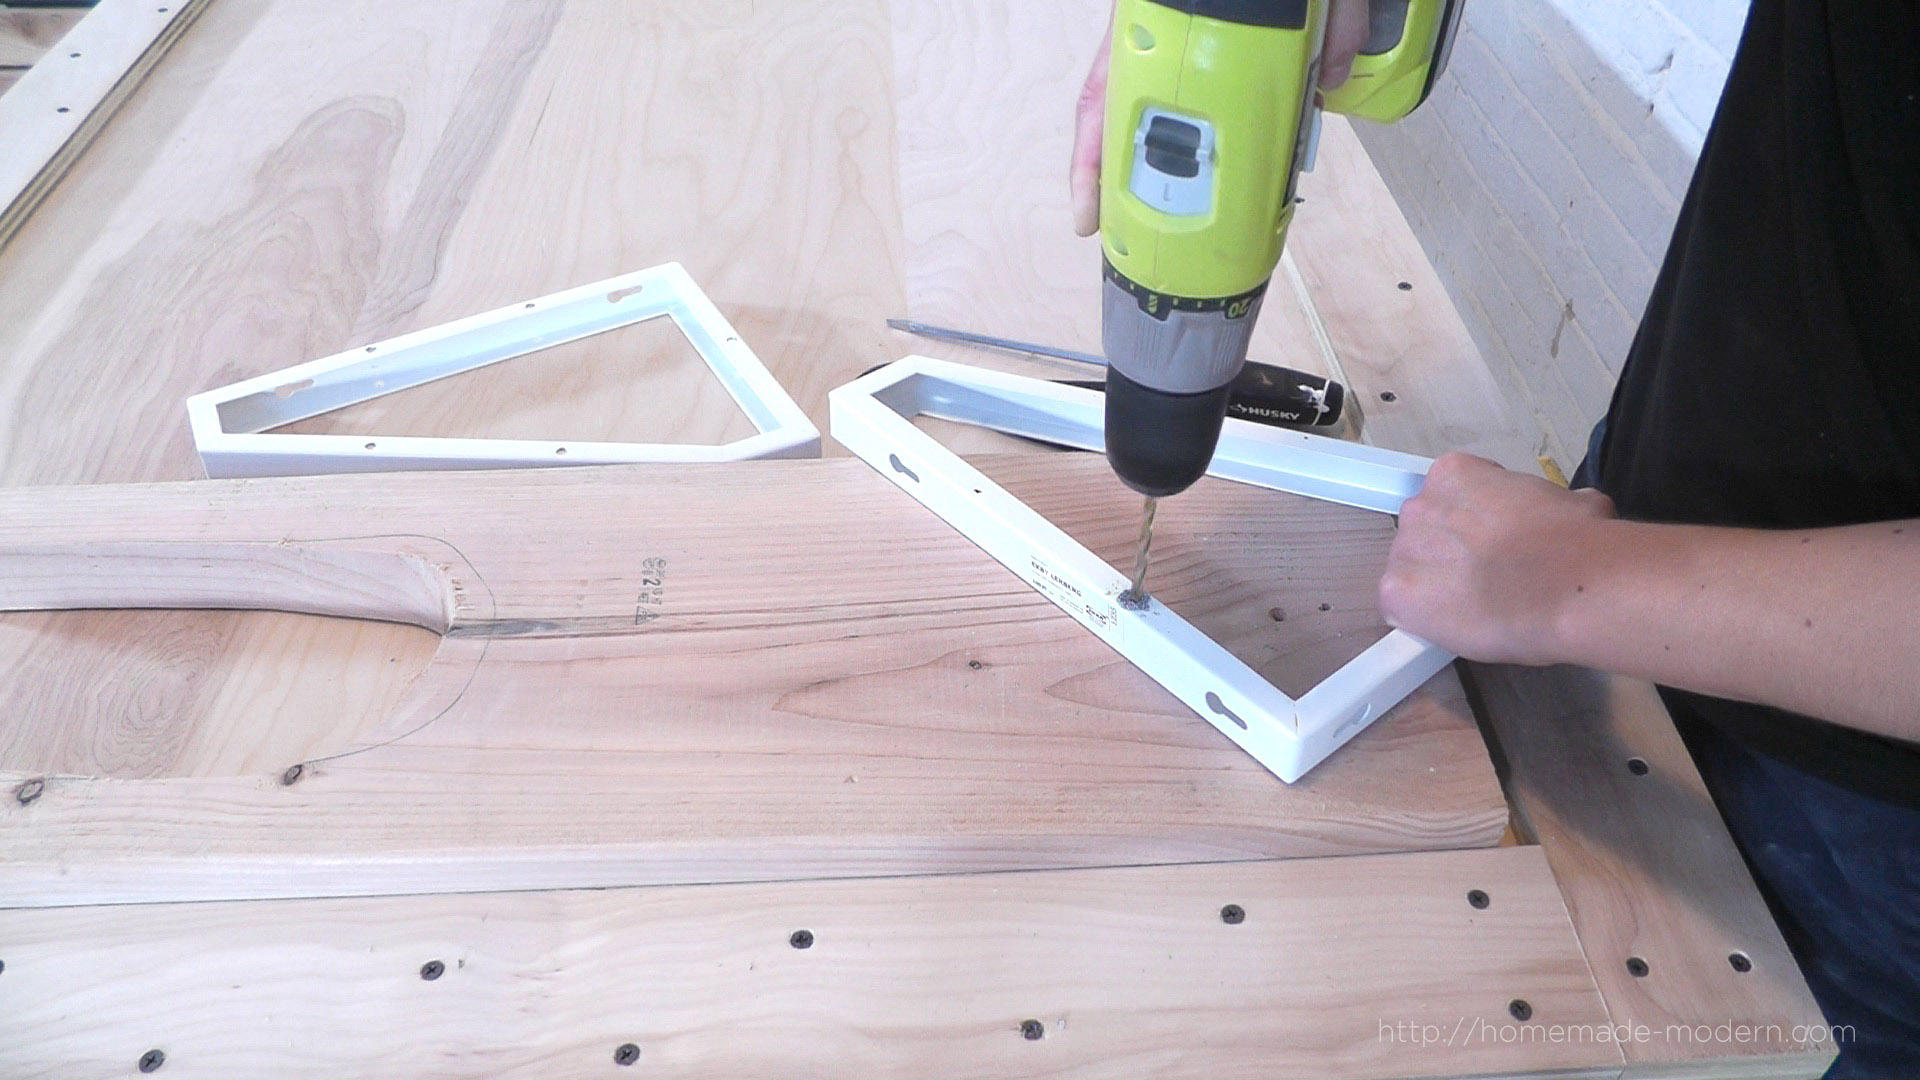 This DIY Modern Bed is made from a sheet of ¾” plywood, and 10 ikea shelf brackets. The materials cost  less than $100 and only 3 power tools are needed to build it. Full instructions can be found at HomeMade-Modern.com.